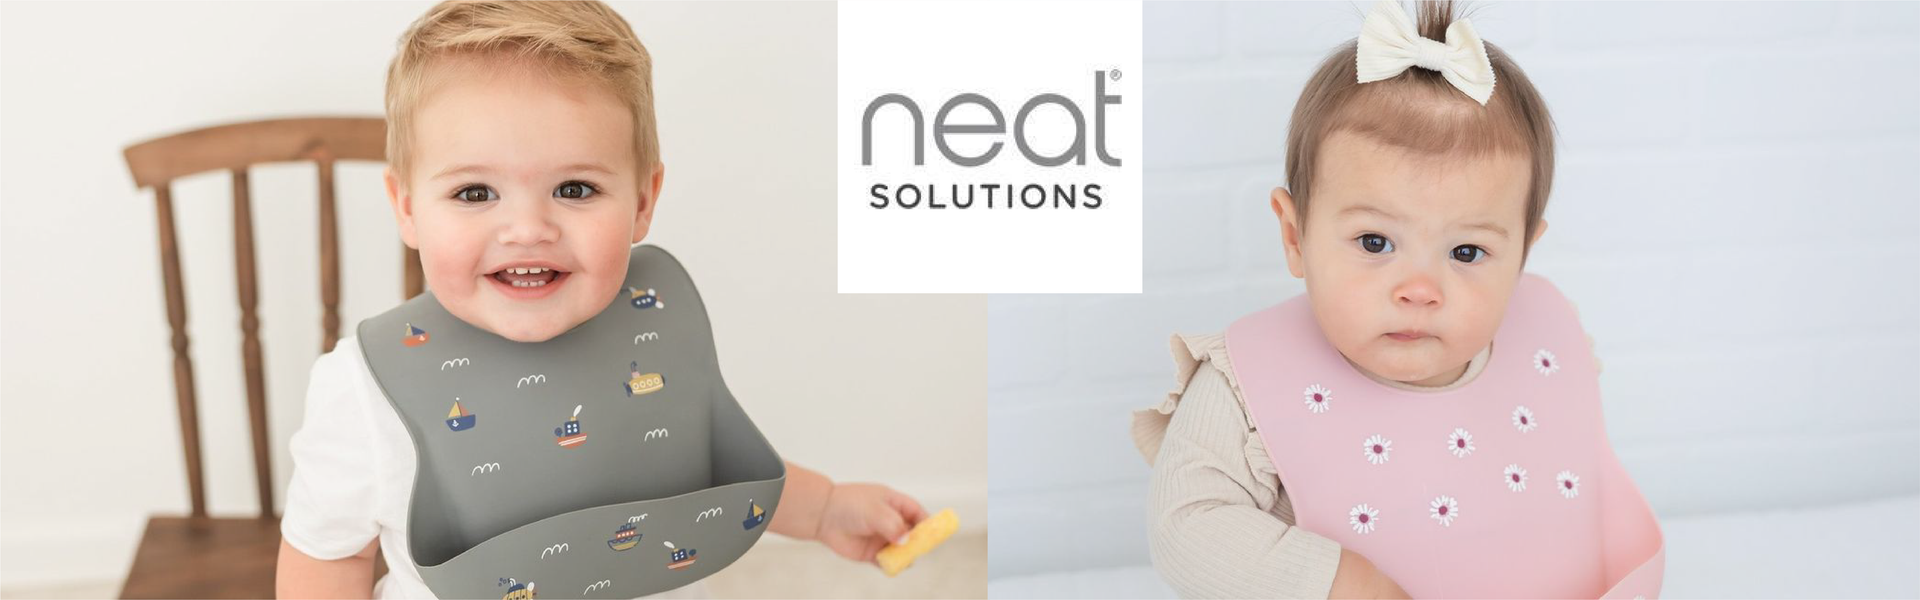 Neat Solutions